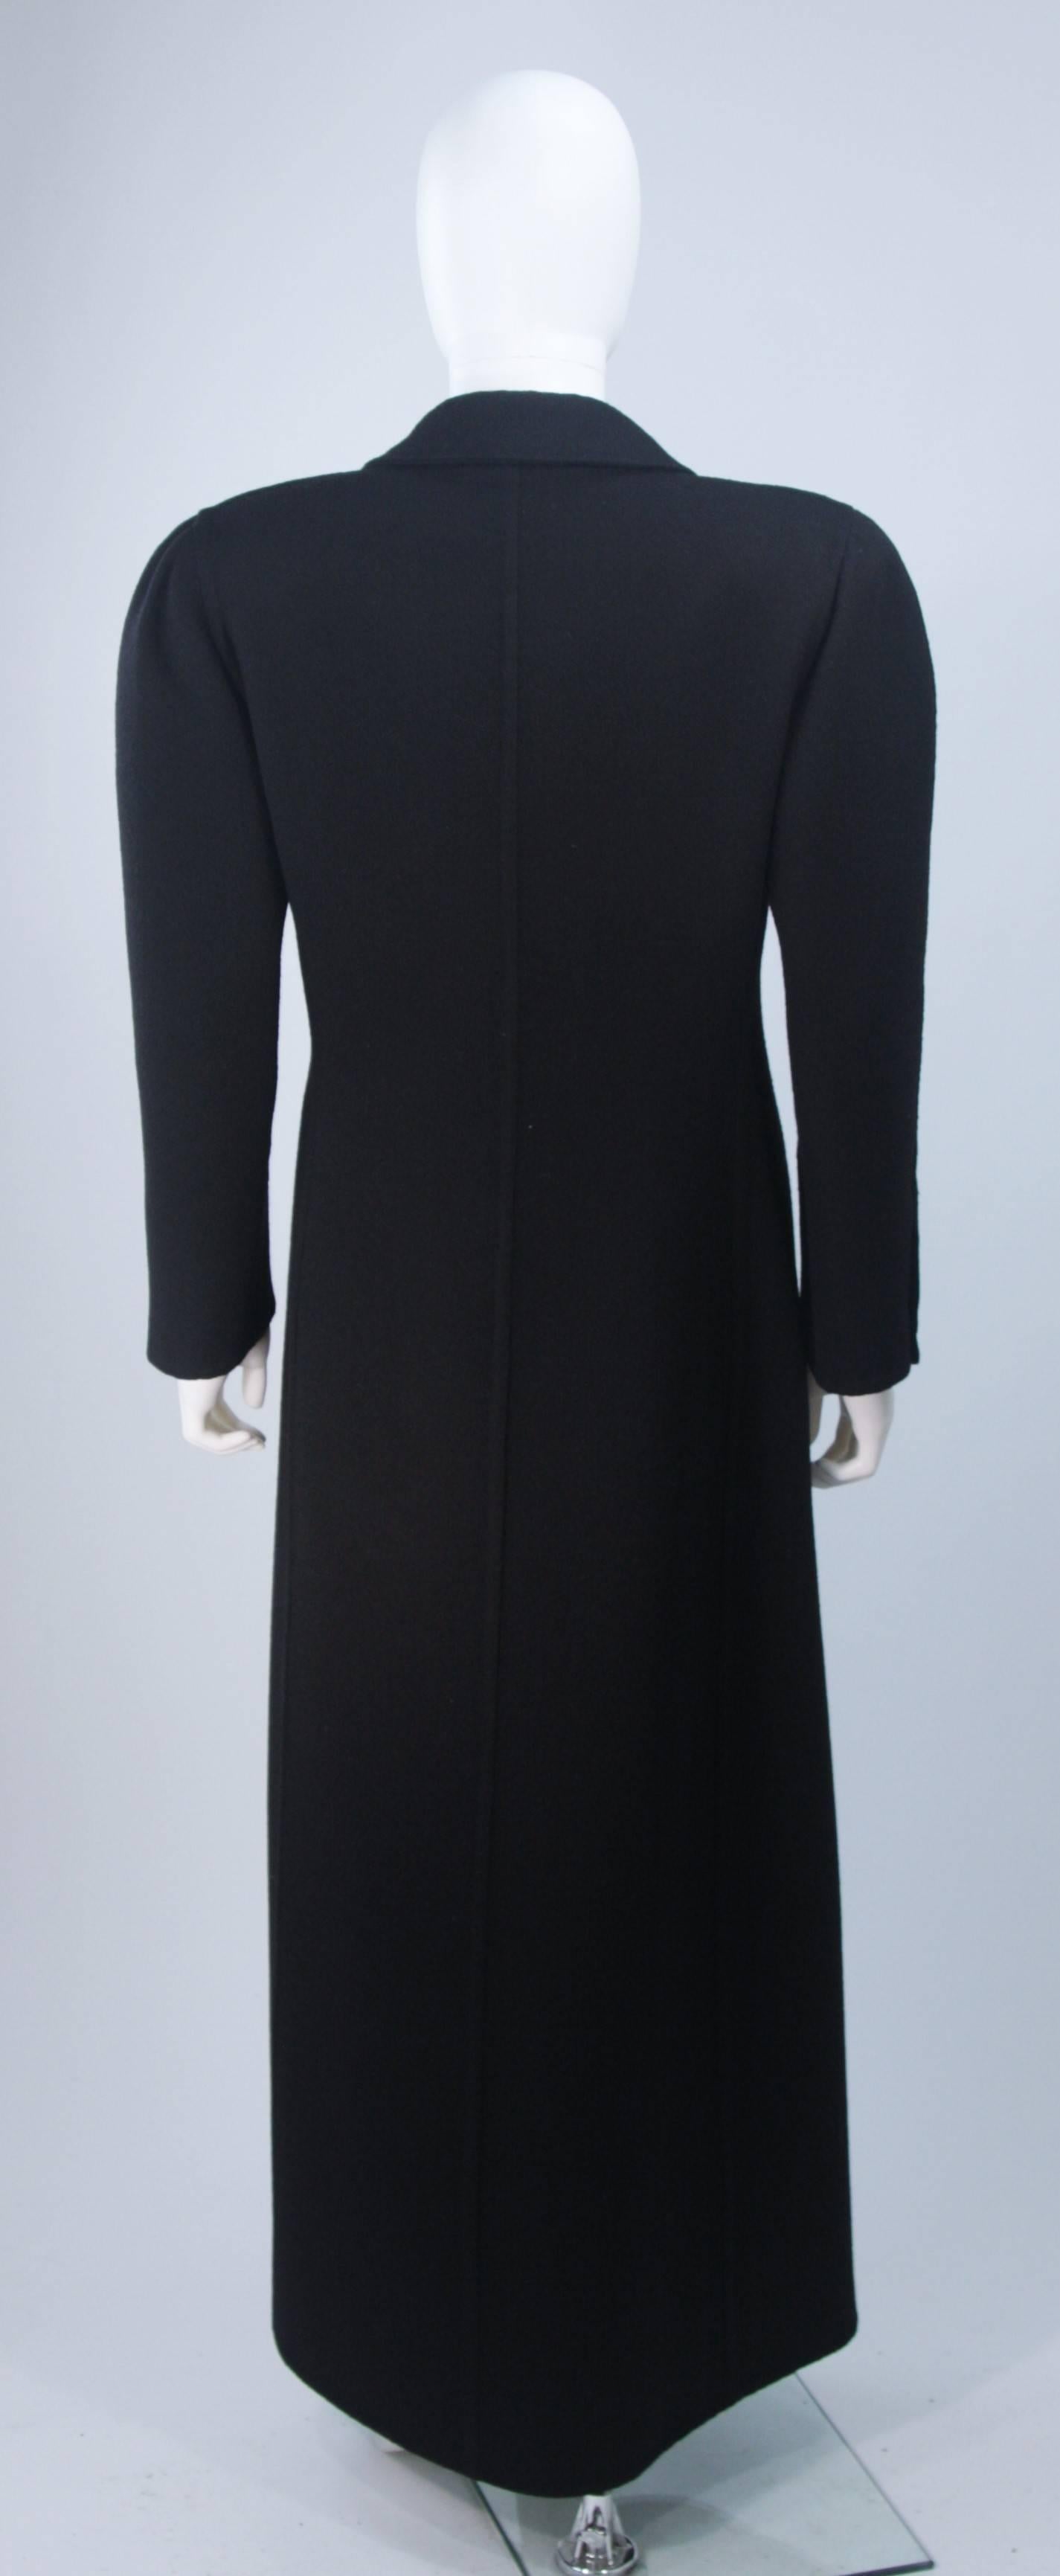 BILL BLASS Black Wool Full Length Coat with Tux Style Trousers Size 6 8 2